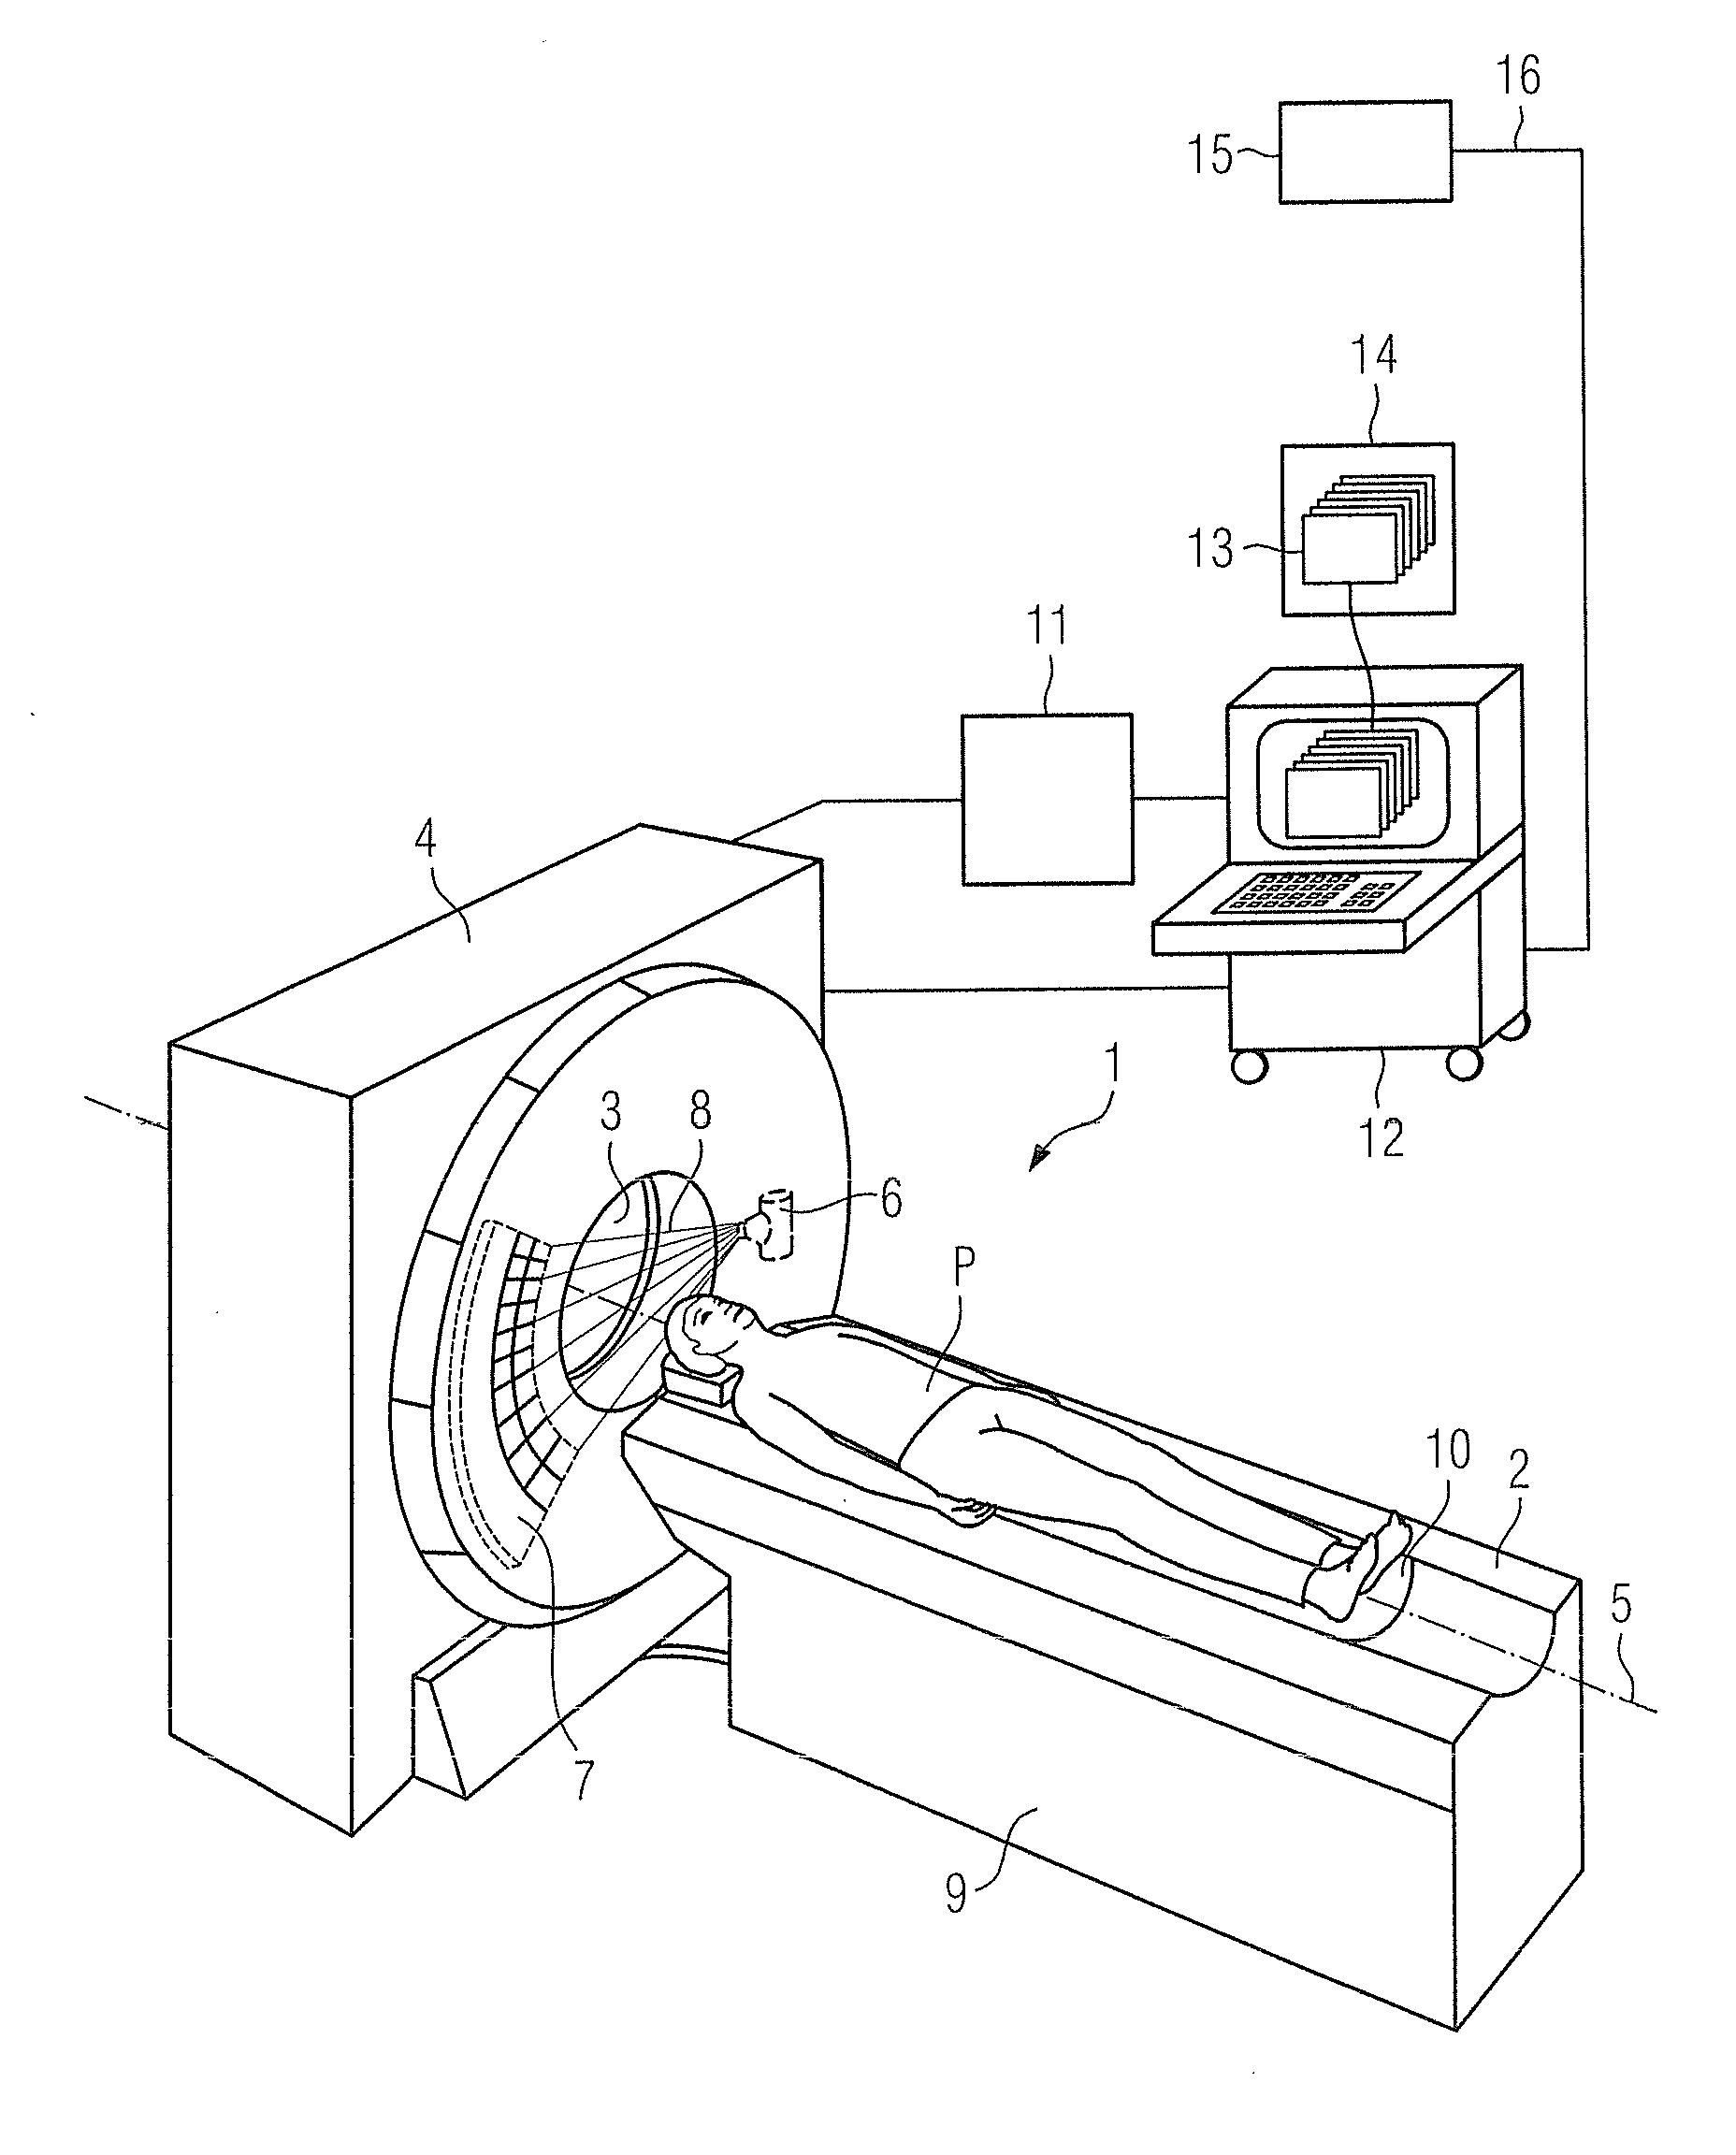 Method and device to assist in dose reduction of x-ray radiation applied to a patient